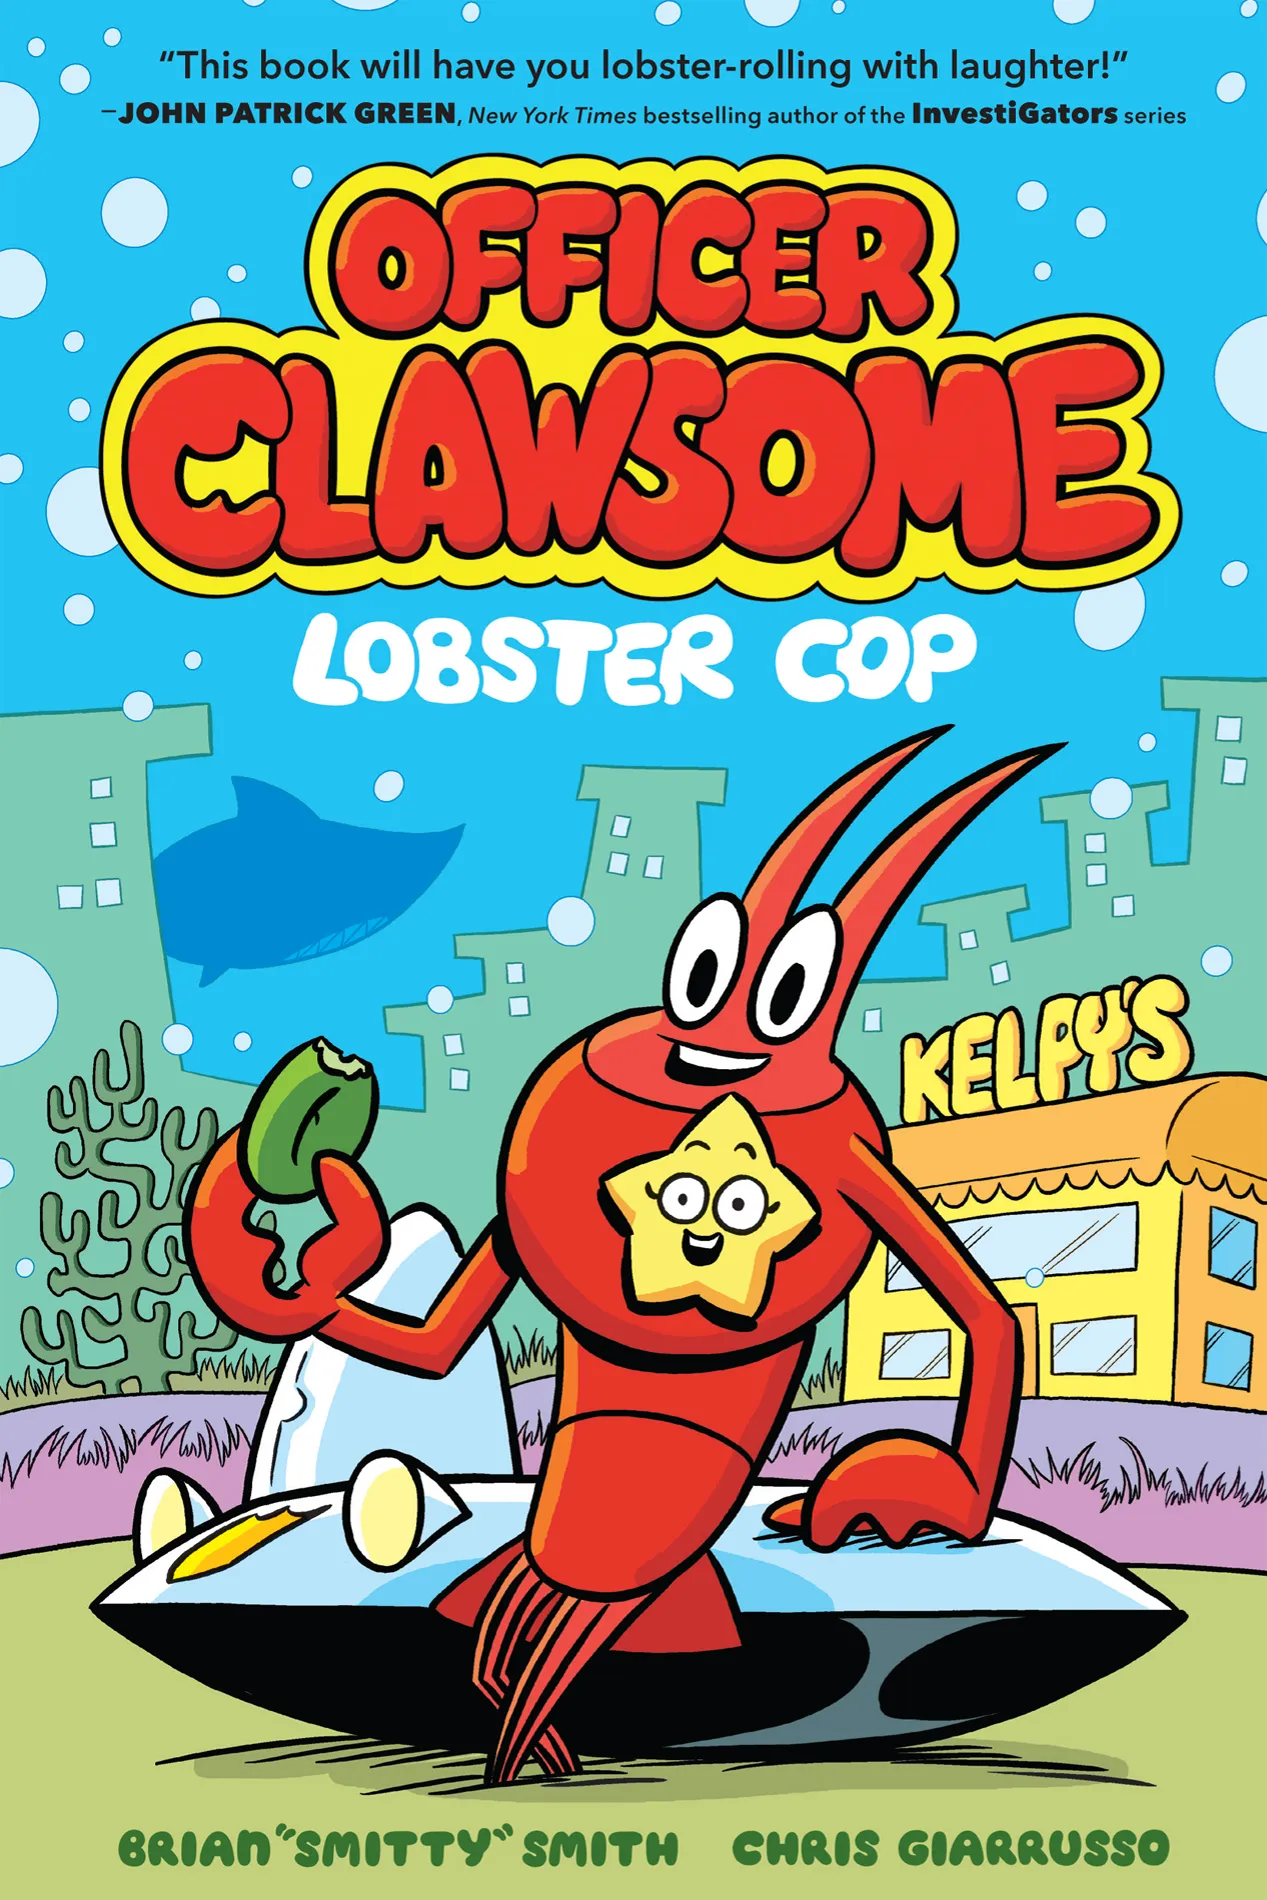 Lobster Cop (Officer Clawsome #1)